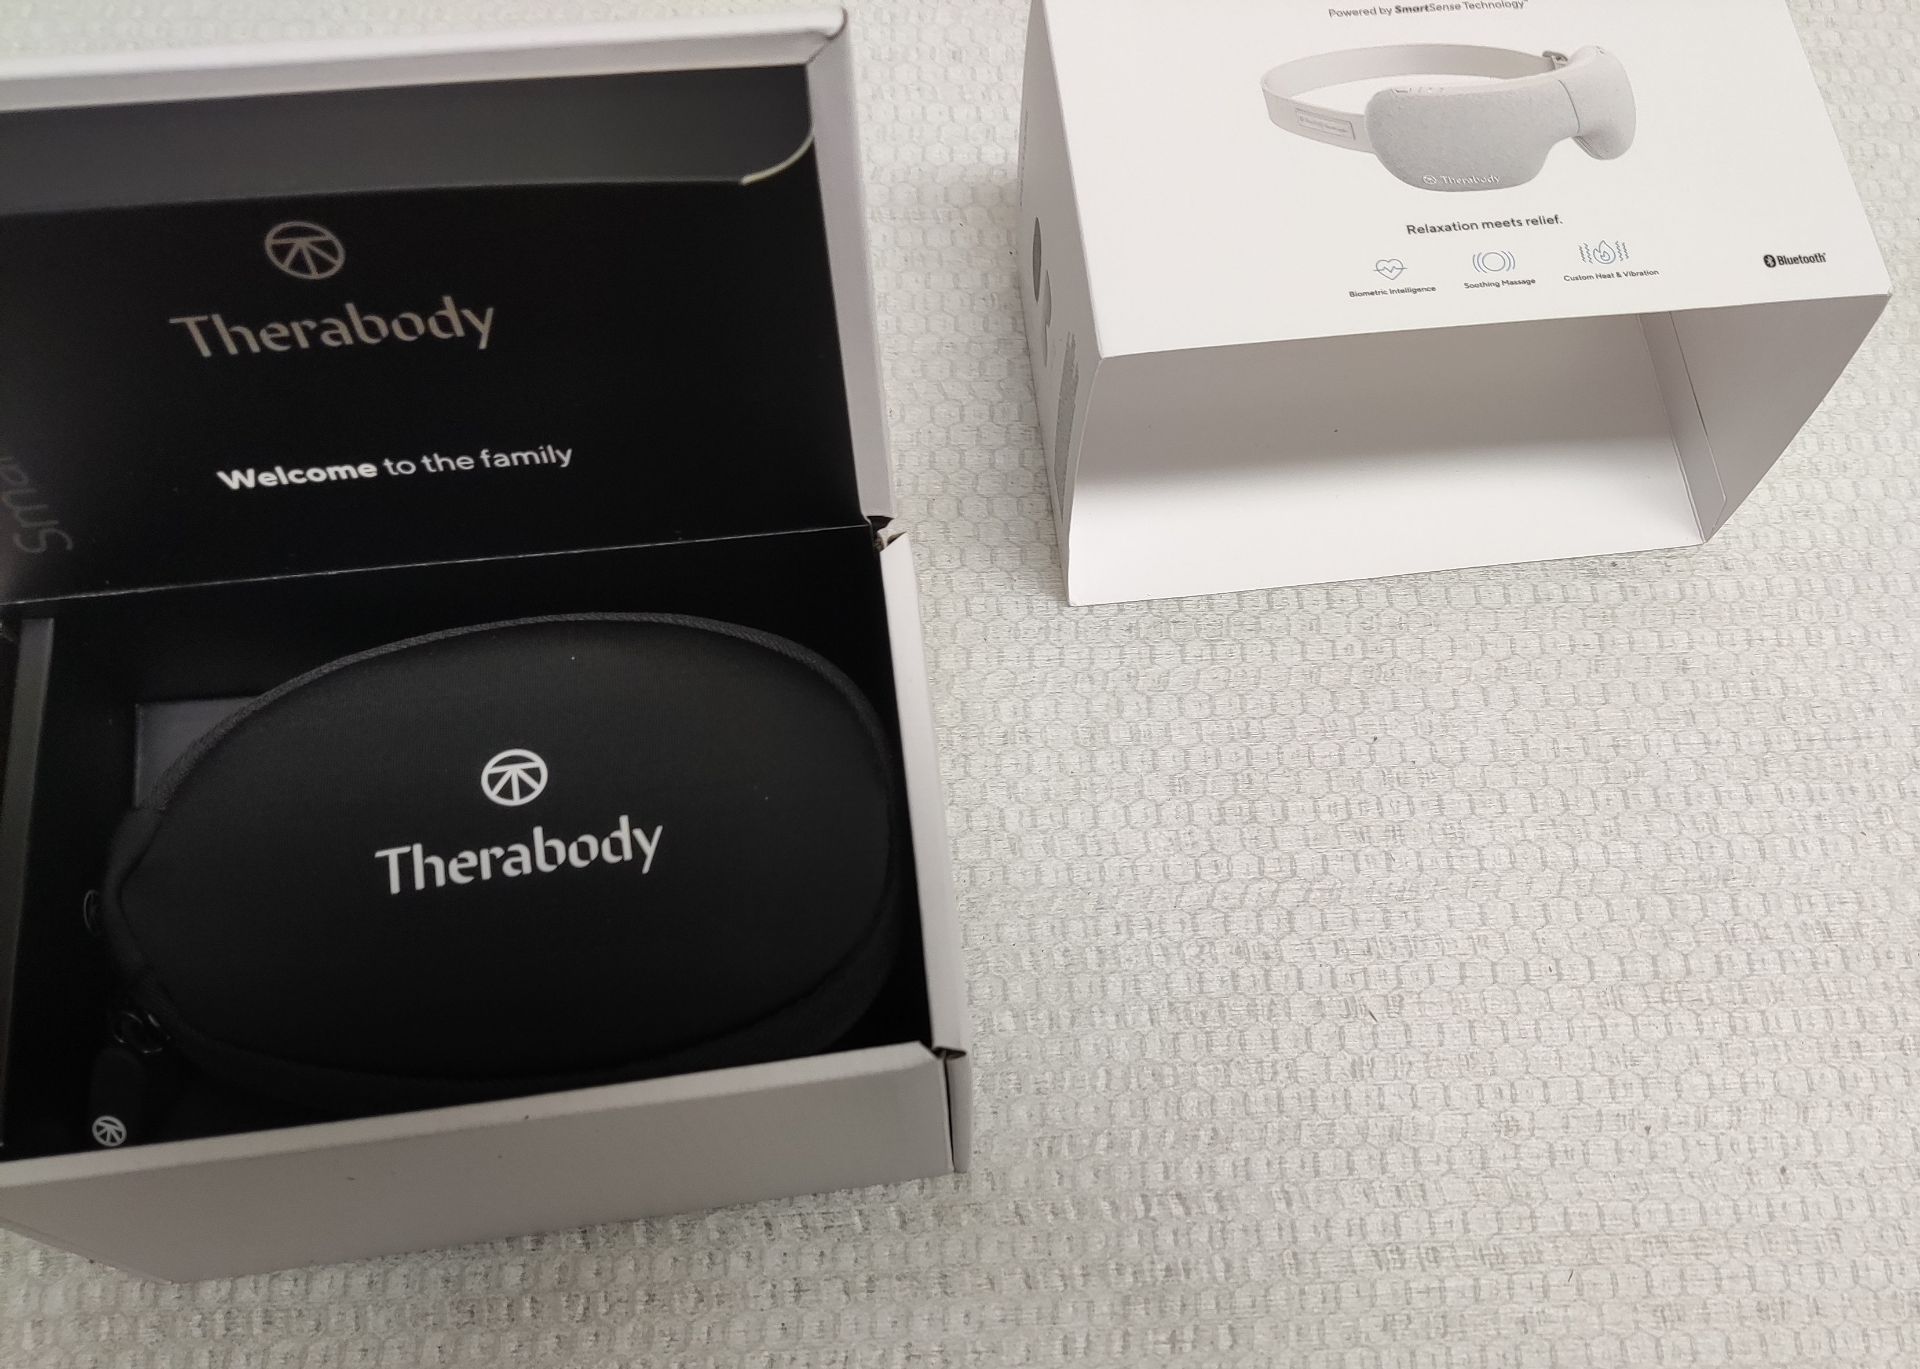 1 x THERABODY Smart Goggles For Sleep, Focus And Stress - Boxed - Original RRP £175.00 - Ref: - Image 7 of 8